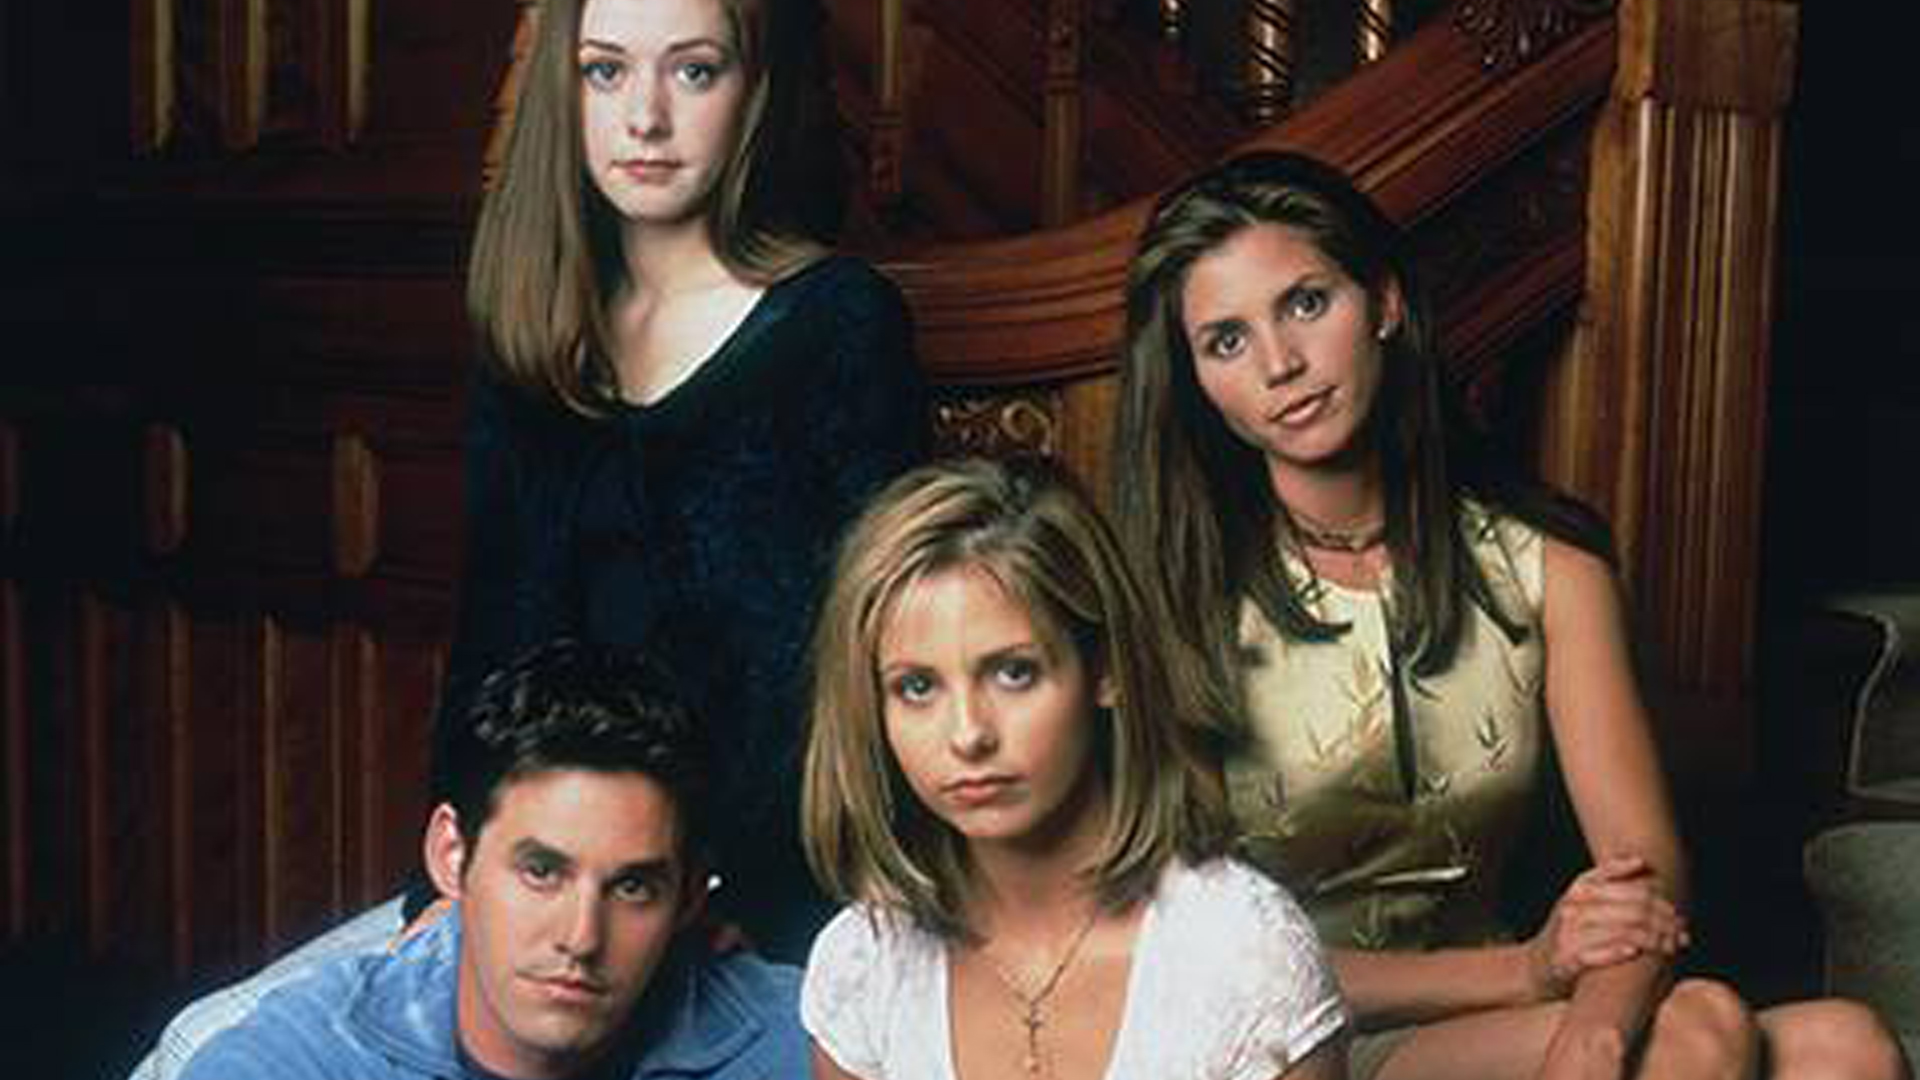 Buffy the Vampire Slayer Audible Sequel Led by Spike Set to Be